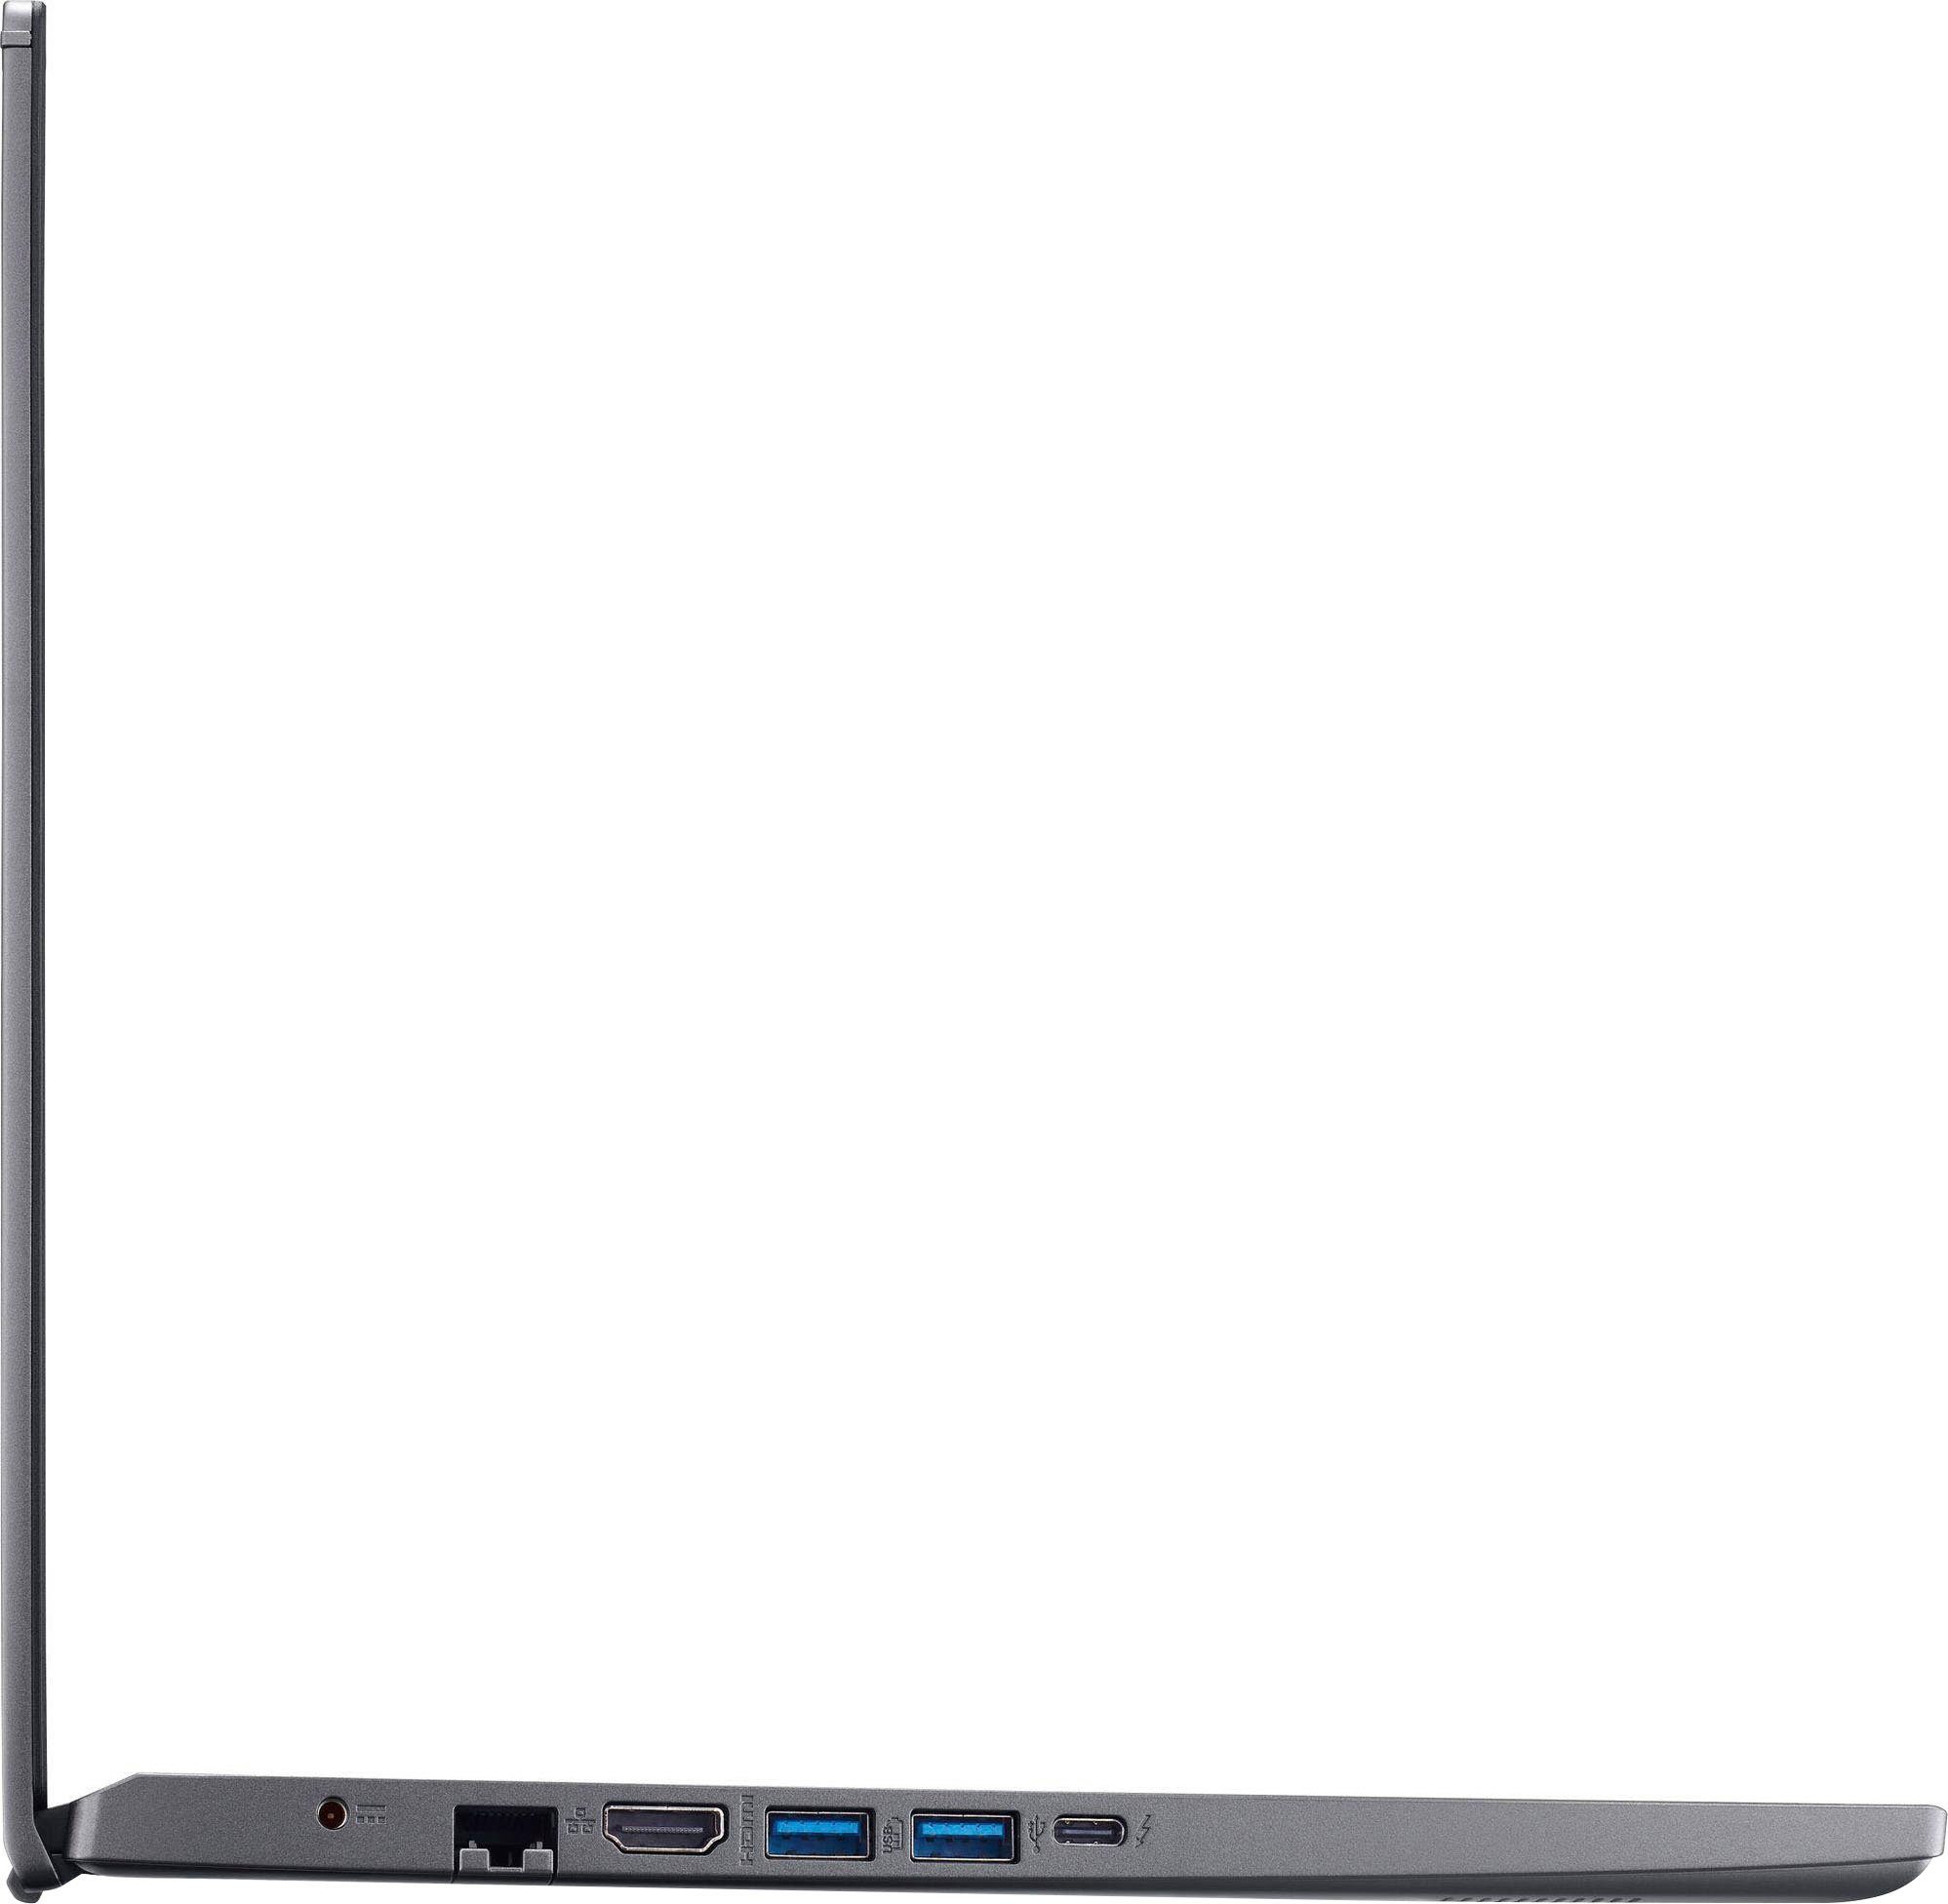 512 Intel Zoll, Graphics, Acer A515-57-53QH (39,62 UHD Core i5 cm/15,6 Notebook GB SSD) 12450H,